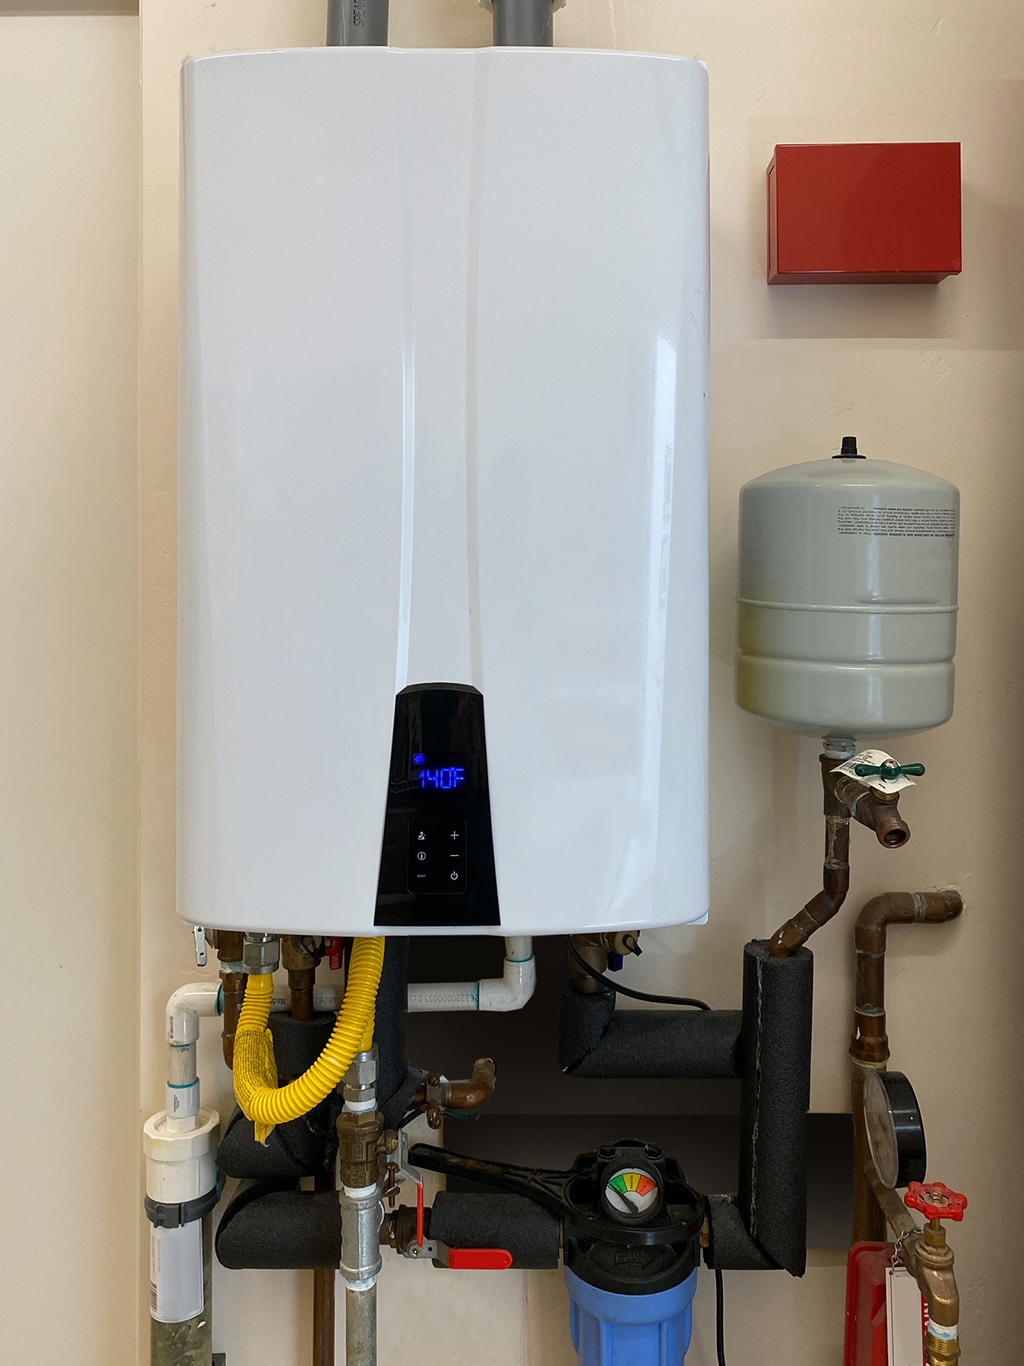 http://benjaminfranklinmb.com/wp-content/uploads/2022/06/Do-Tankless-Water-Heaters-Require-Less-Water-Heater-Repair-Are-There-Other-Benefits-_-Conway-SC.jpg